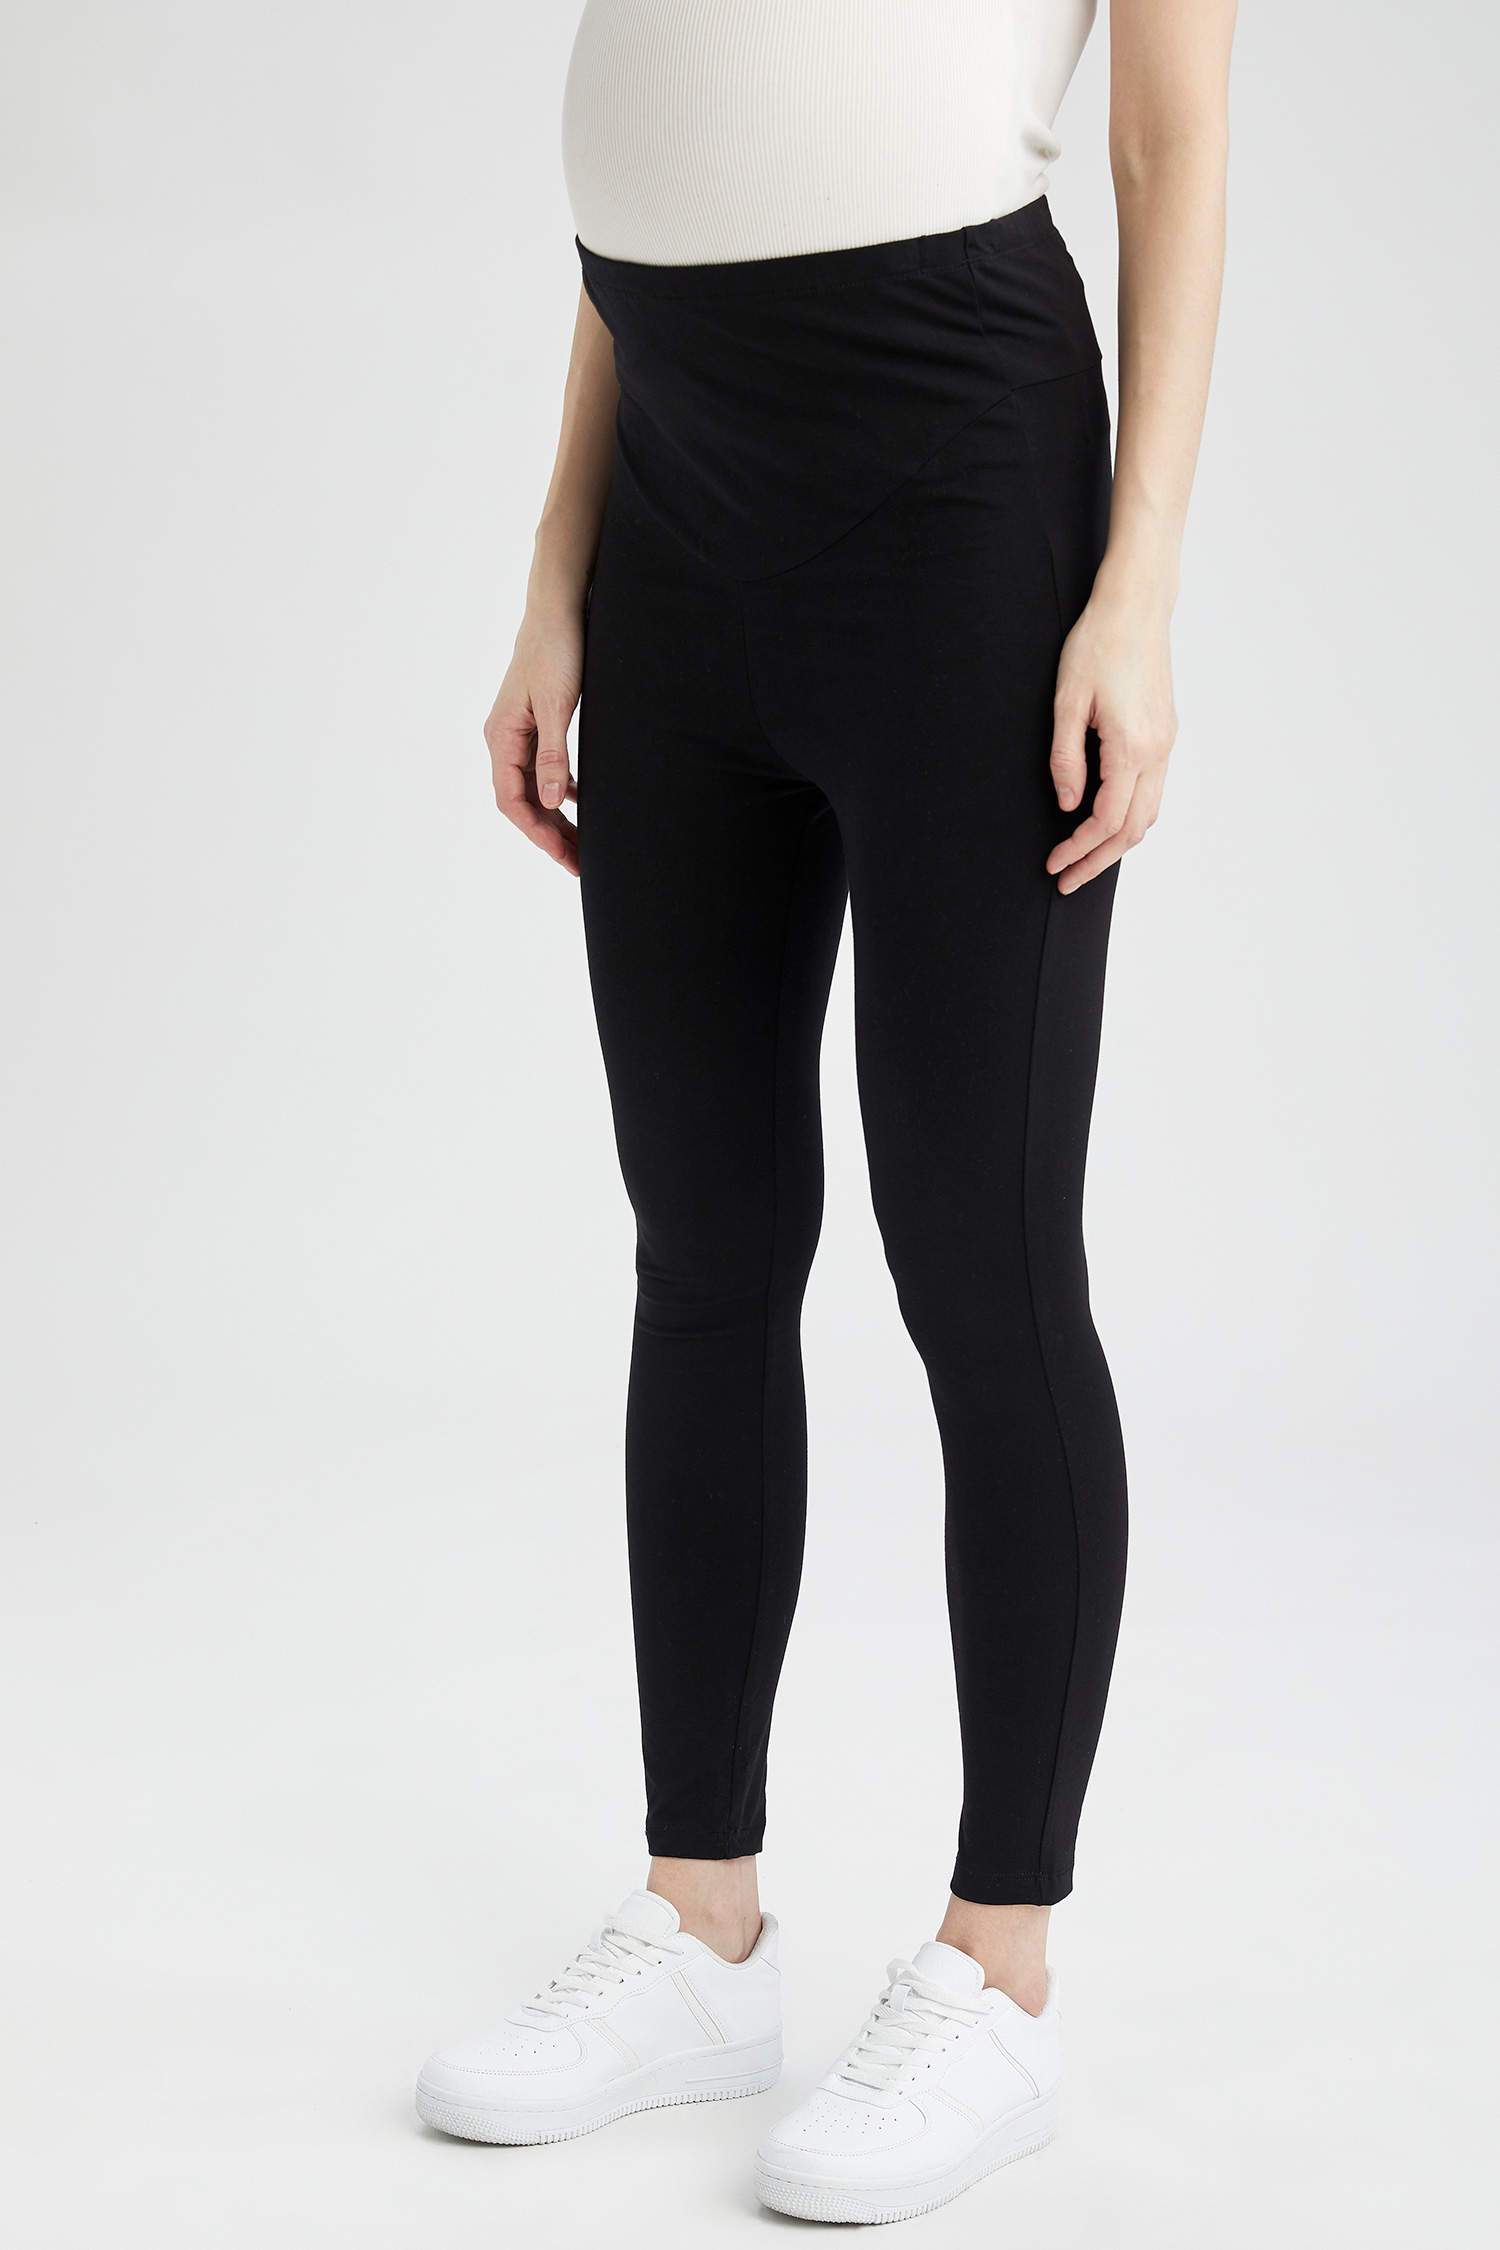 Black Woman Slim Fit Knitted Maternity Tights 1444063 | DeFacto